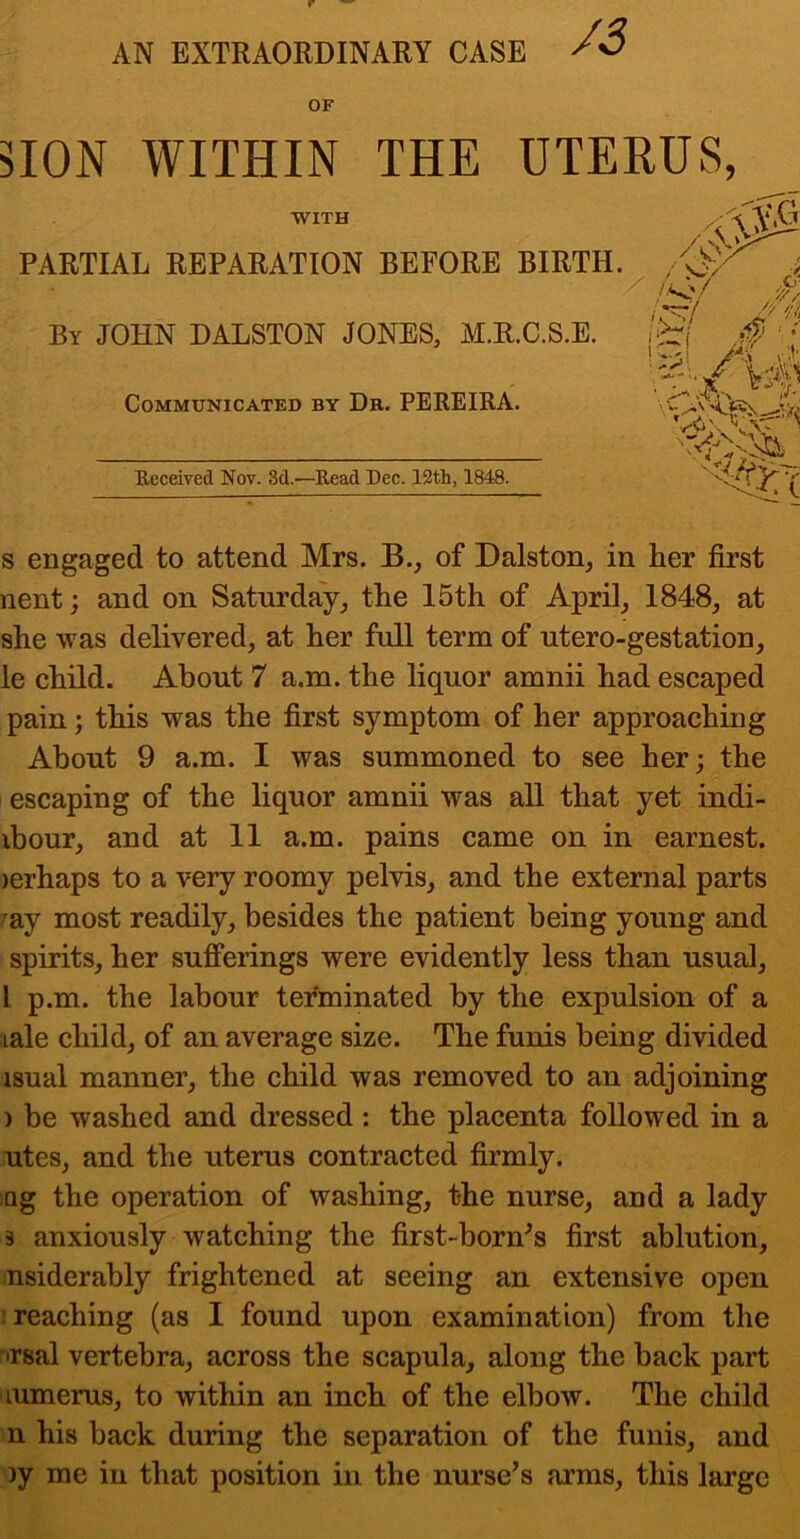 AN EXTRAORDINARY CASE OF nON WITHIN THE UTERUS, WITH PARTIAL REPARATION BEFORE BIRTH. By JOHN DALSTON JONES, M.R.C.S.E. Communicated by Dk. PEREIRA. Keceived Nov. 3d.—Read Dec. 12th, 1848. s engaged to attend Mrs. B., of Dalston, in her first nent; and on Saturday, the 15th of April, 1848, at she was delivered, at her full term of utero-gestation, le child. About 7 a.m. the liquor amnii had escaped pain; this was the first symptom of her approaching About 9 a.m. I was summoned to see her; the escaping of the liquor amnii was all that yet indi- ibour, and at 11 a.m. pains came on in earnest. )erhaps to a very roomy pelvis, and the external parts ^ay most readily, besides the patient being young and spirits, her sufferings were evidently less than usual, I p.m. the labour terminated by the expulsion of a lale child, of an average size. The funis being divided isual manner, the child was removed to an adjoining ) be washed and dressed: the placenta followed in a utes, and the uterus contracted firmly. Qg the operation of washing, the nurse, and a lady 3 anxiously watching the first-born^s first ablution, nsiderably frightened at seeing an extensive open : reaching (as I found upon examination) from the •irsal vertebra, across the scapula, along the back part lumerus, to within an inch of the elbow. The child n his back during the separation of the funis, and )y me in that position in the nurse’s arms, this large ,.c? - s'